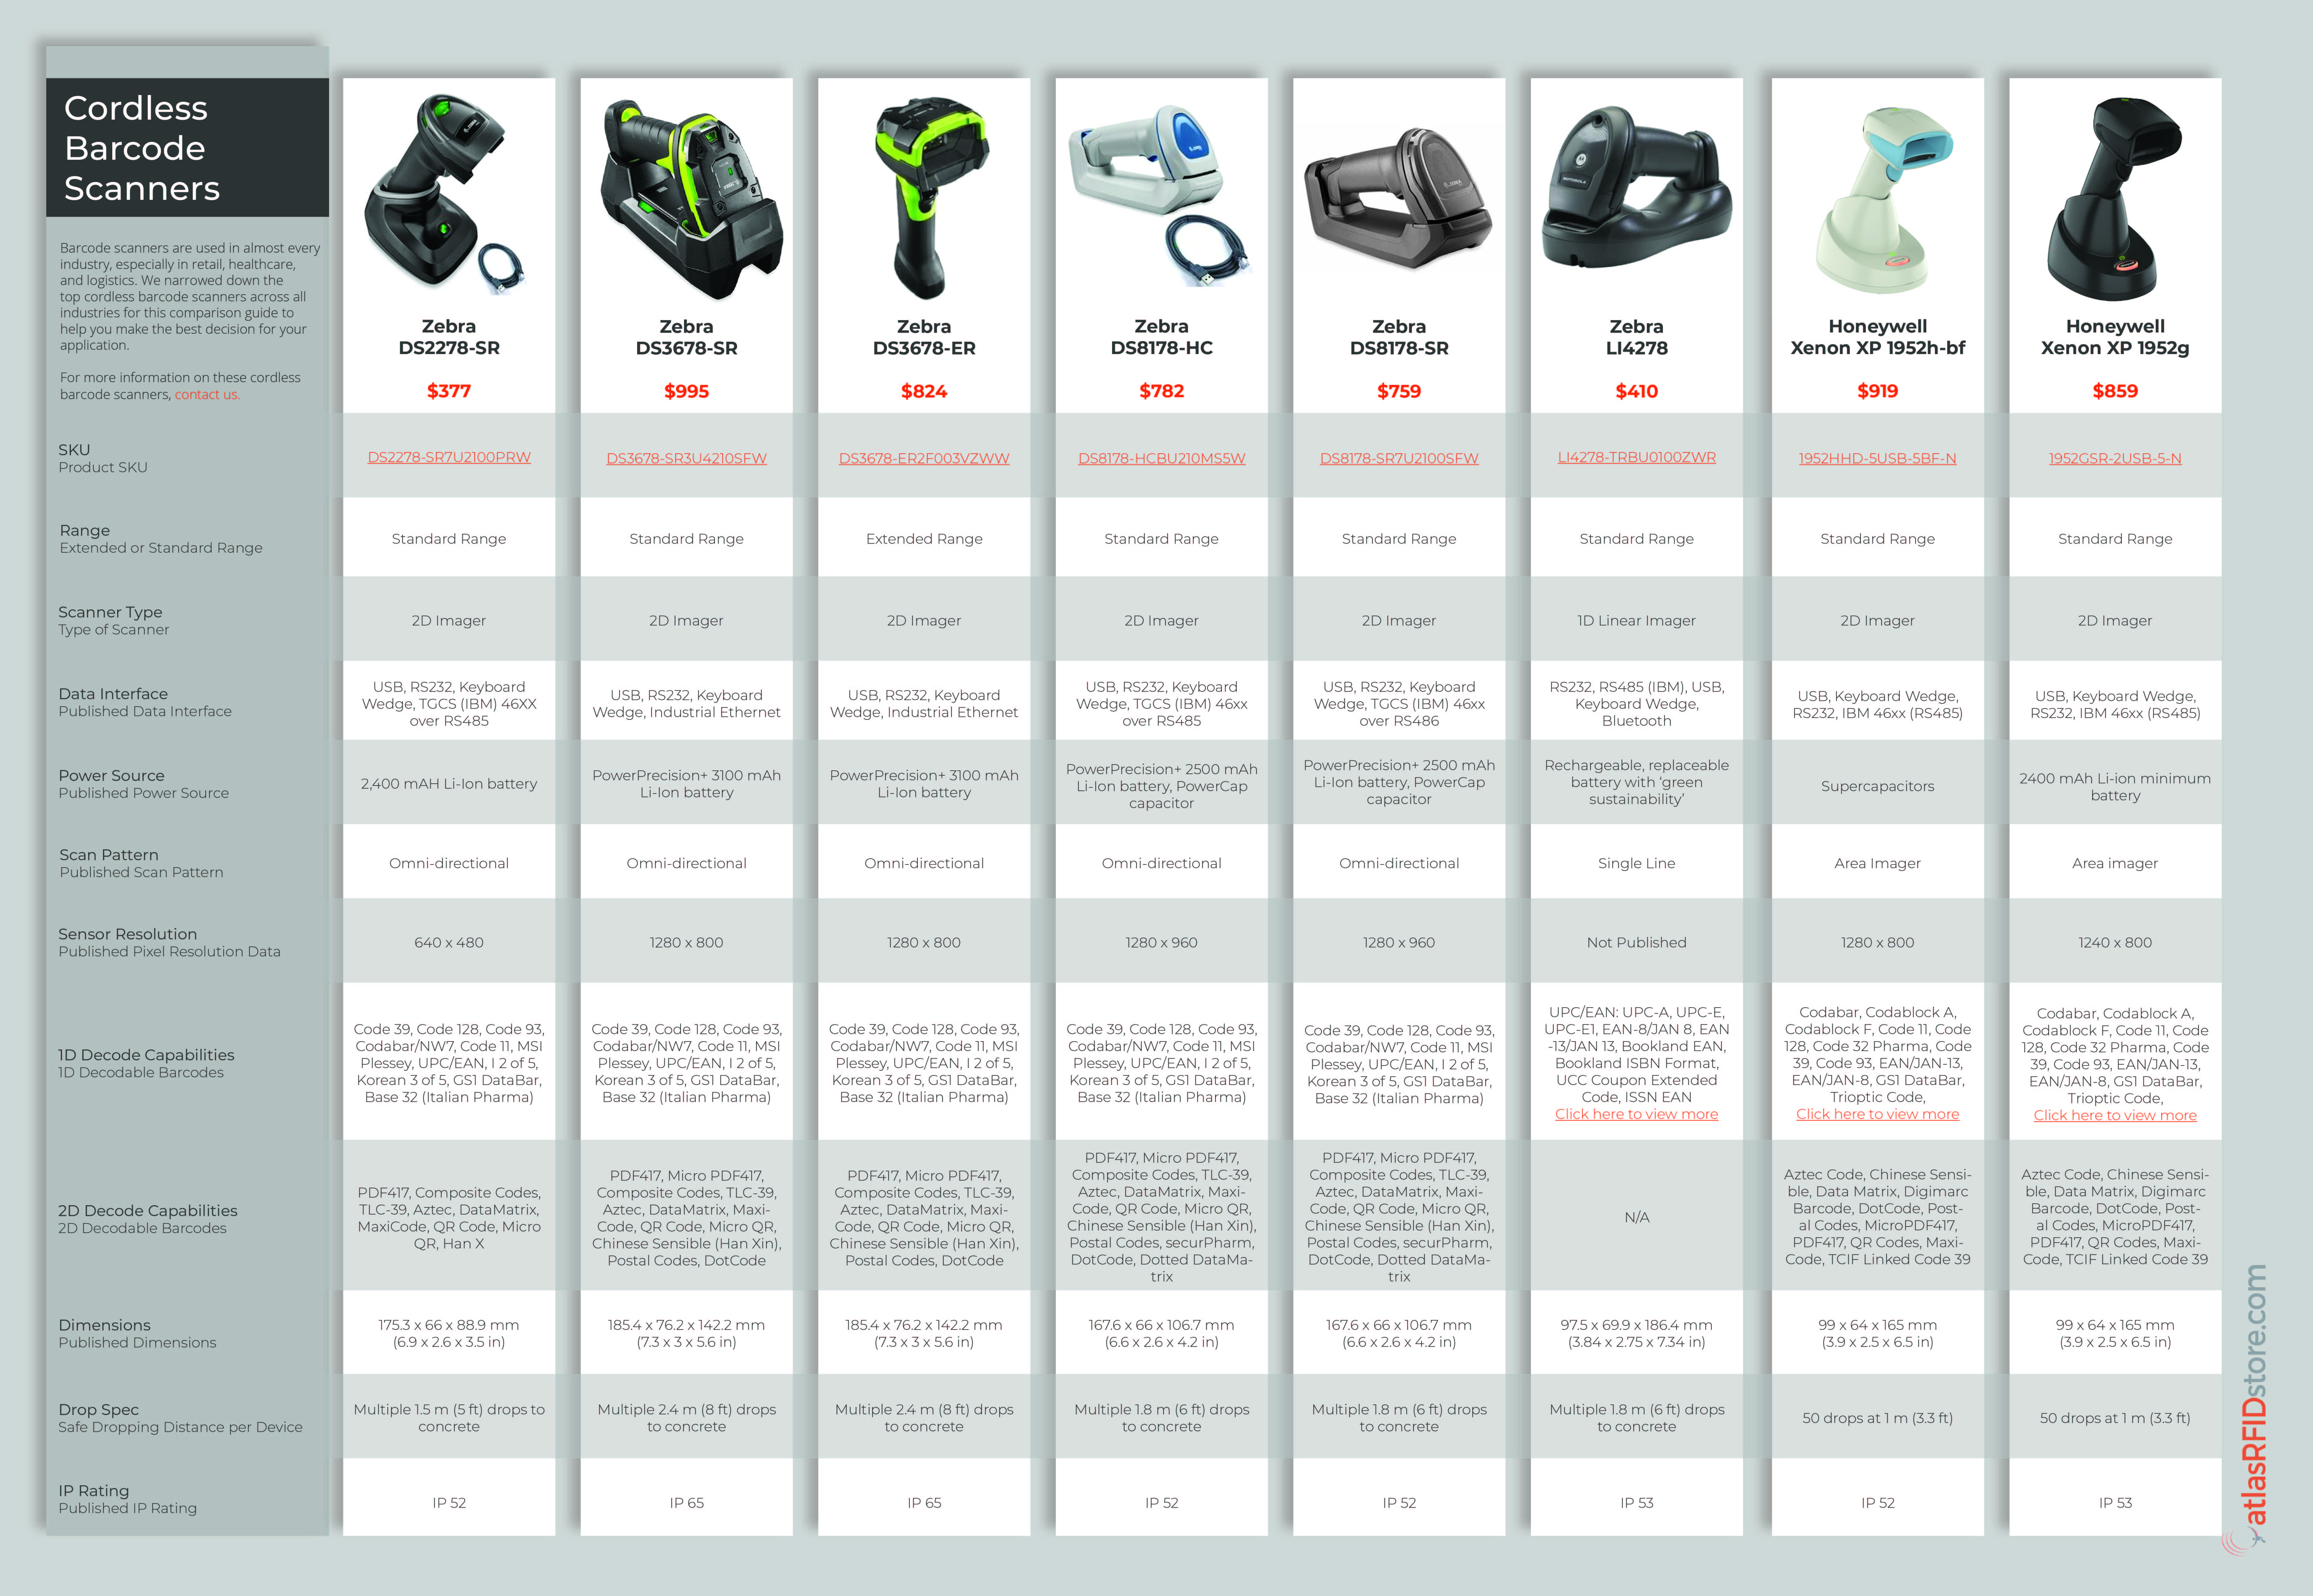 Cordless Barcode Scanner Comparison Guide